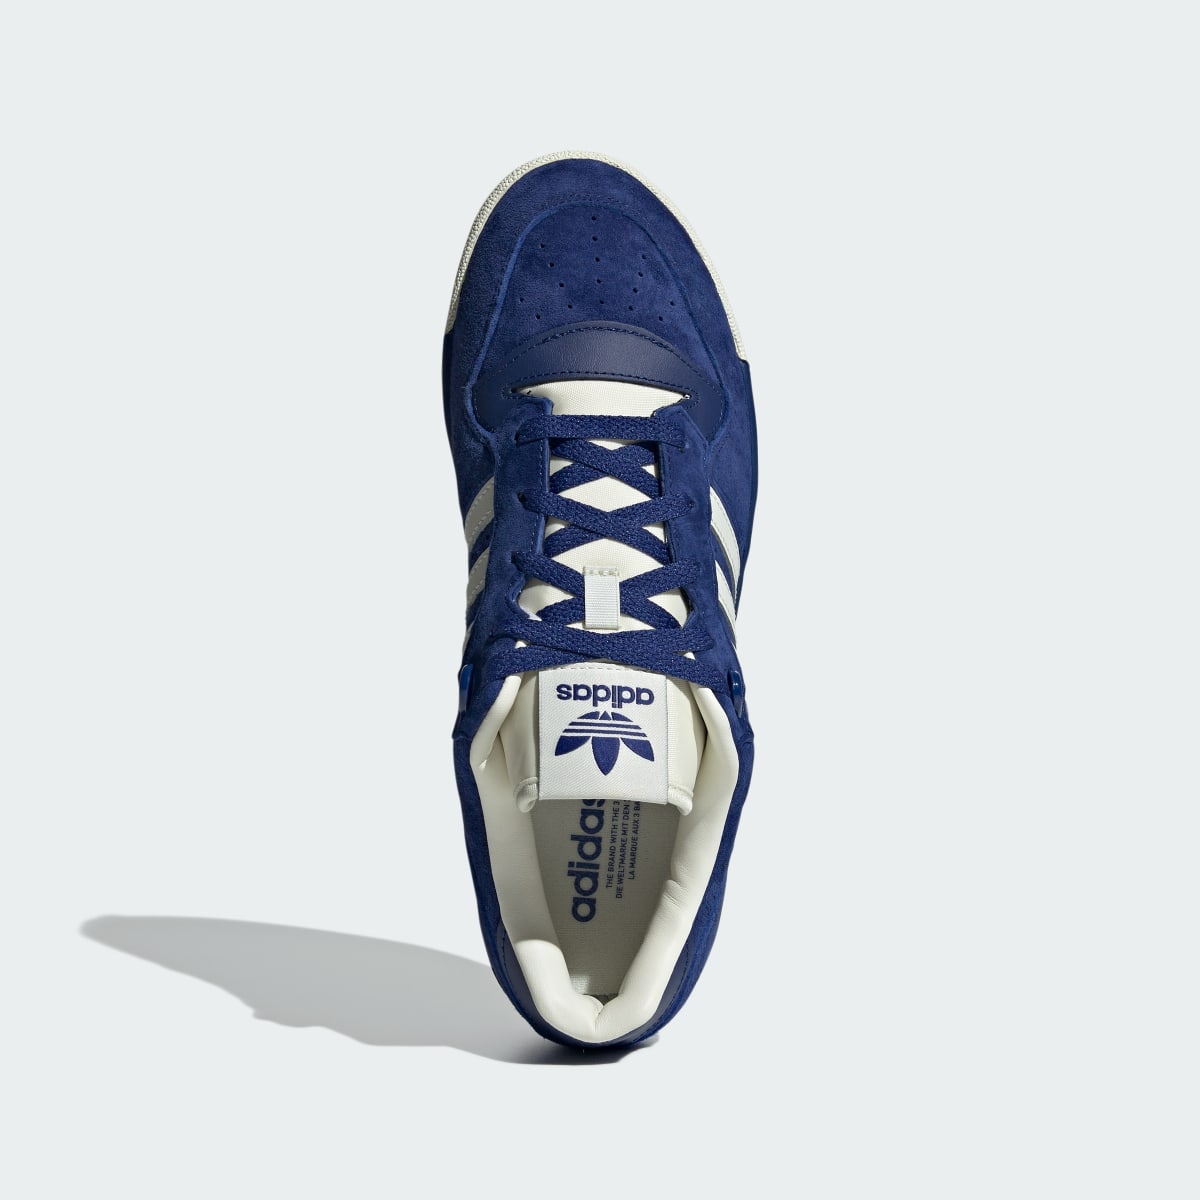 Adidas Rivalry Low Schuh. 4